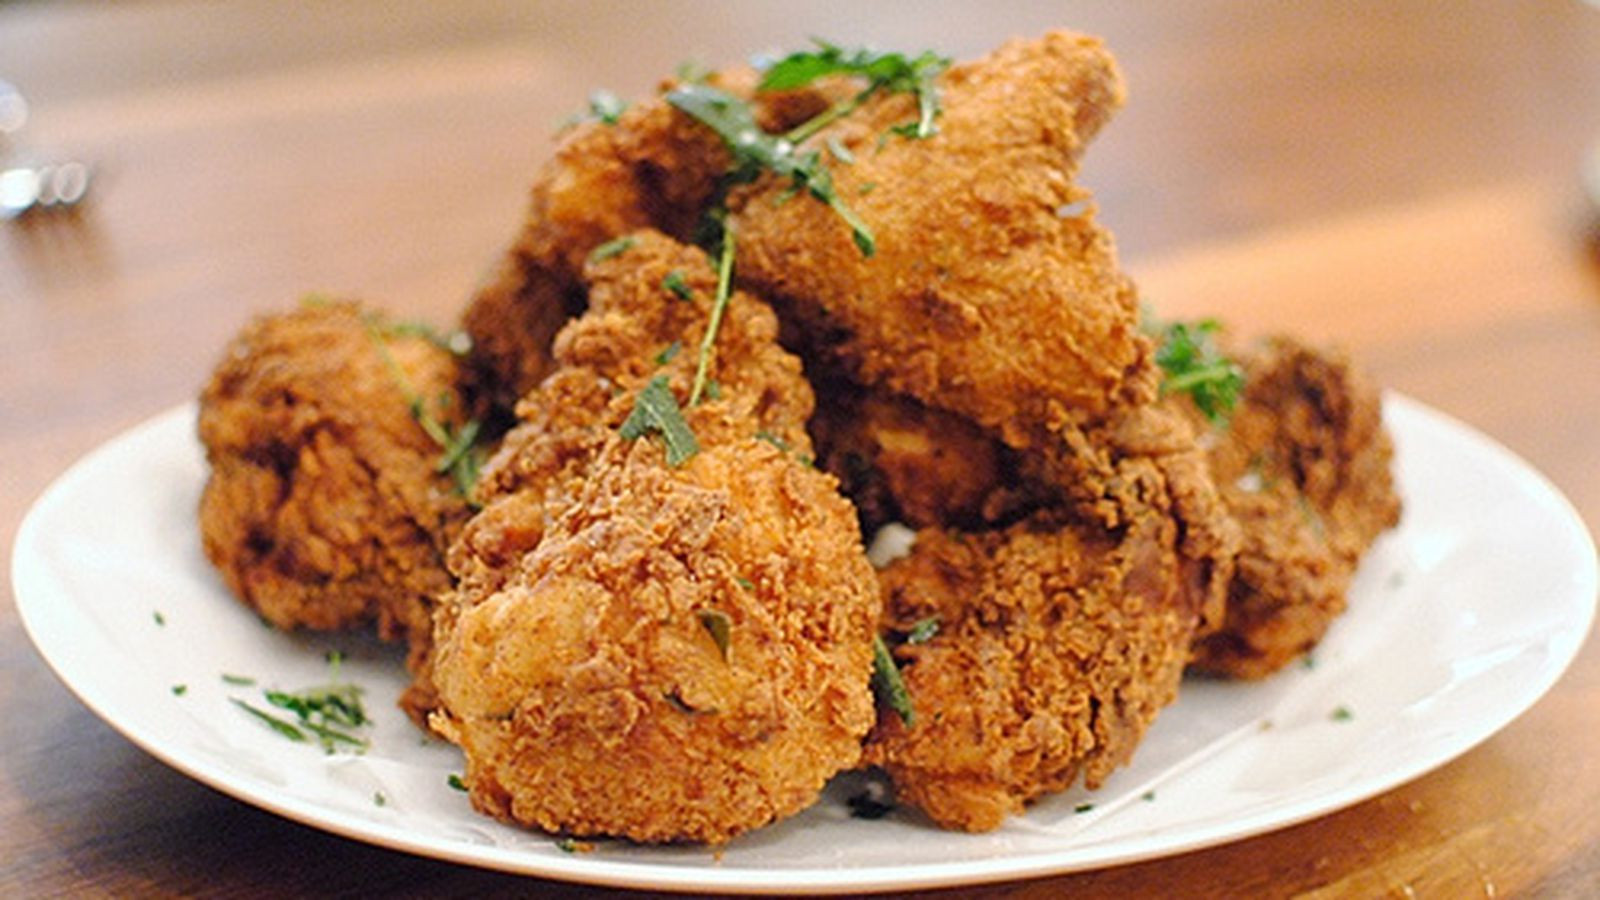 Best Fried Chicken Los Angeles
 The 16 Best Fried Chicken Dishes in Los Angeles Eater LA